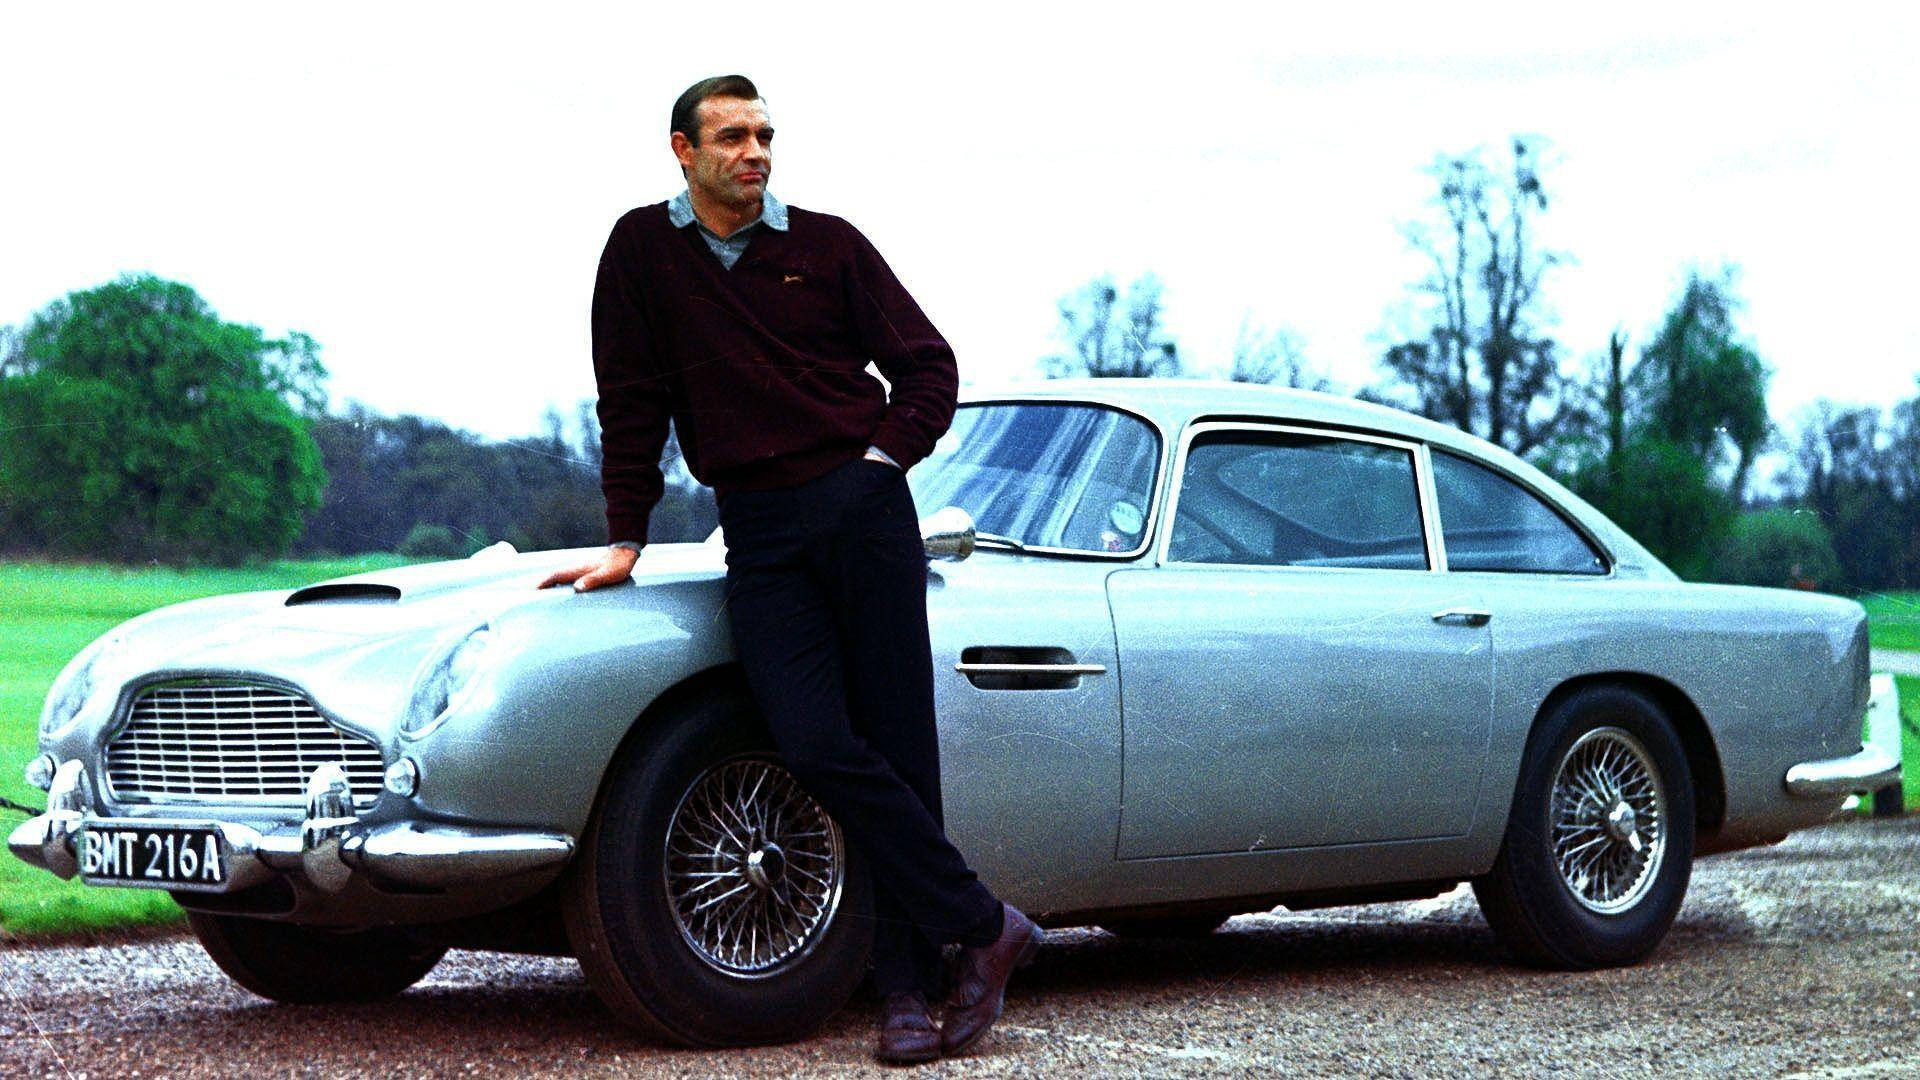 James Bond With Old Car